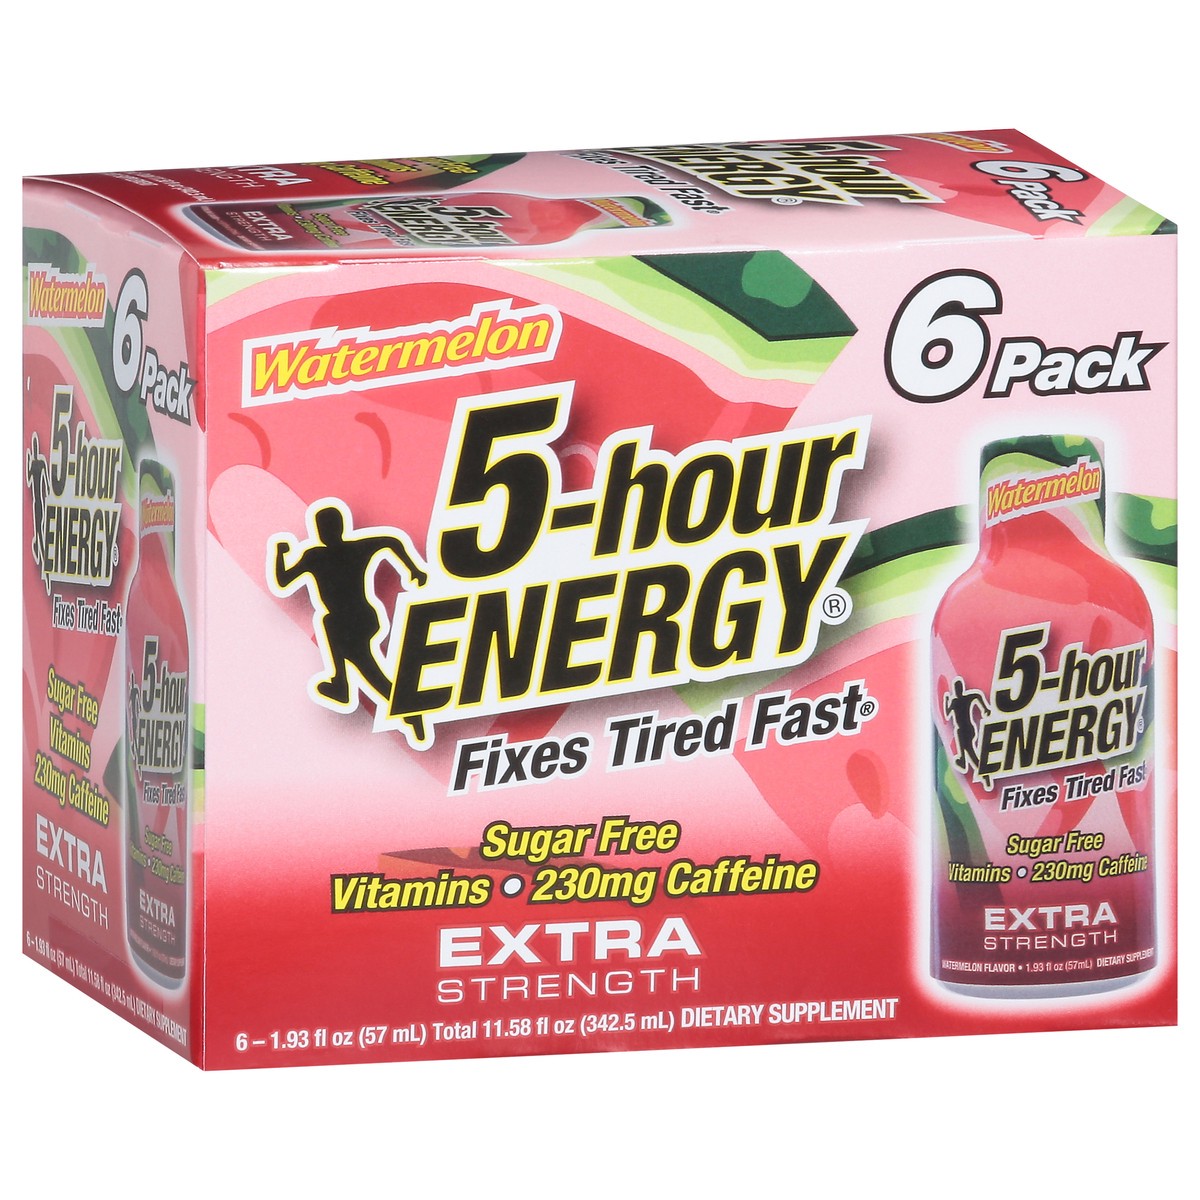 slide 6 of 15, 5-hour ENERGY 5-Hour Watermelon Extra Strength 6-pack, 6 ct